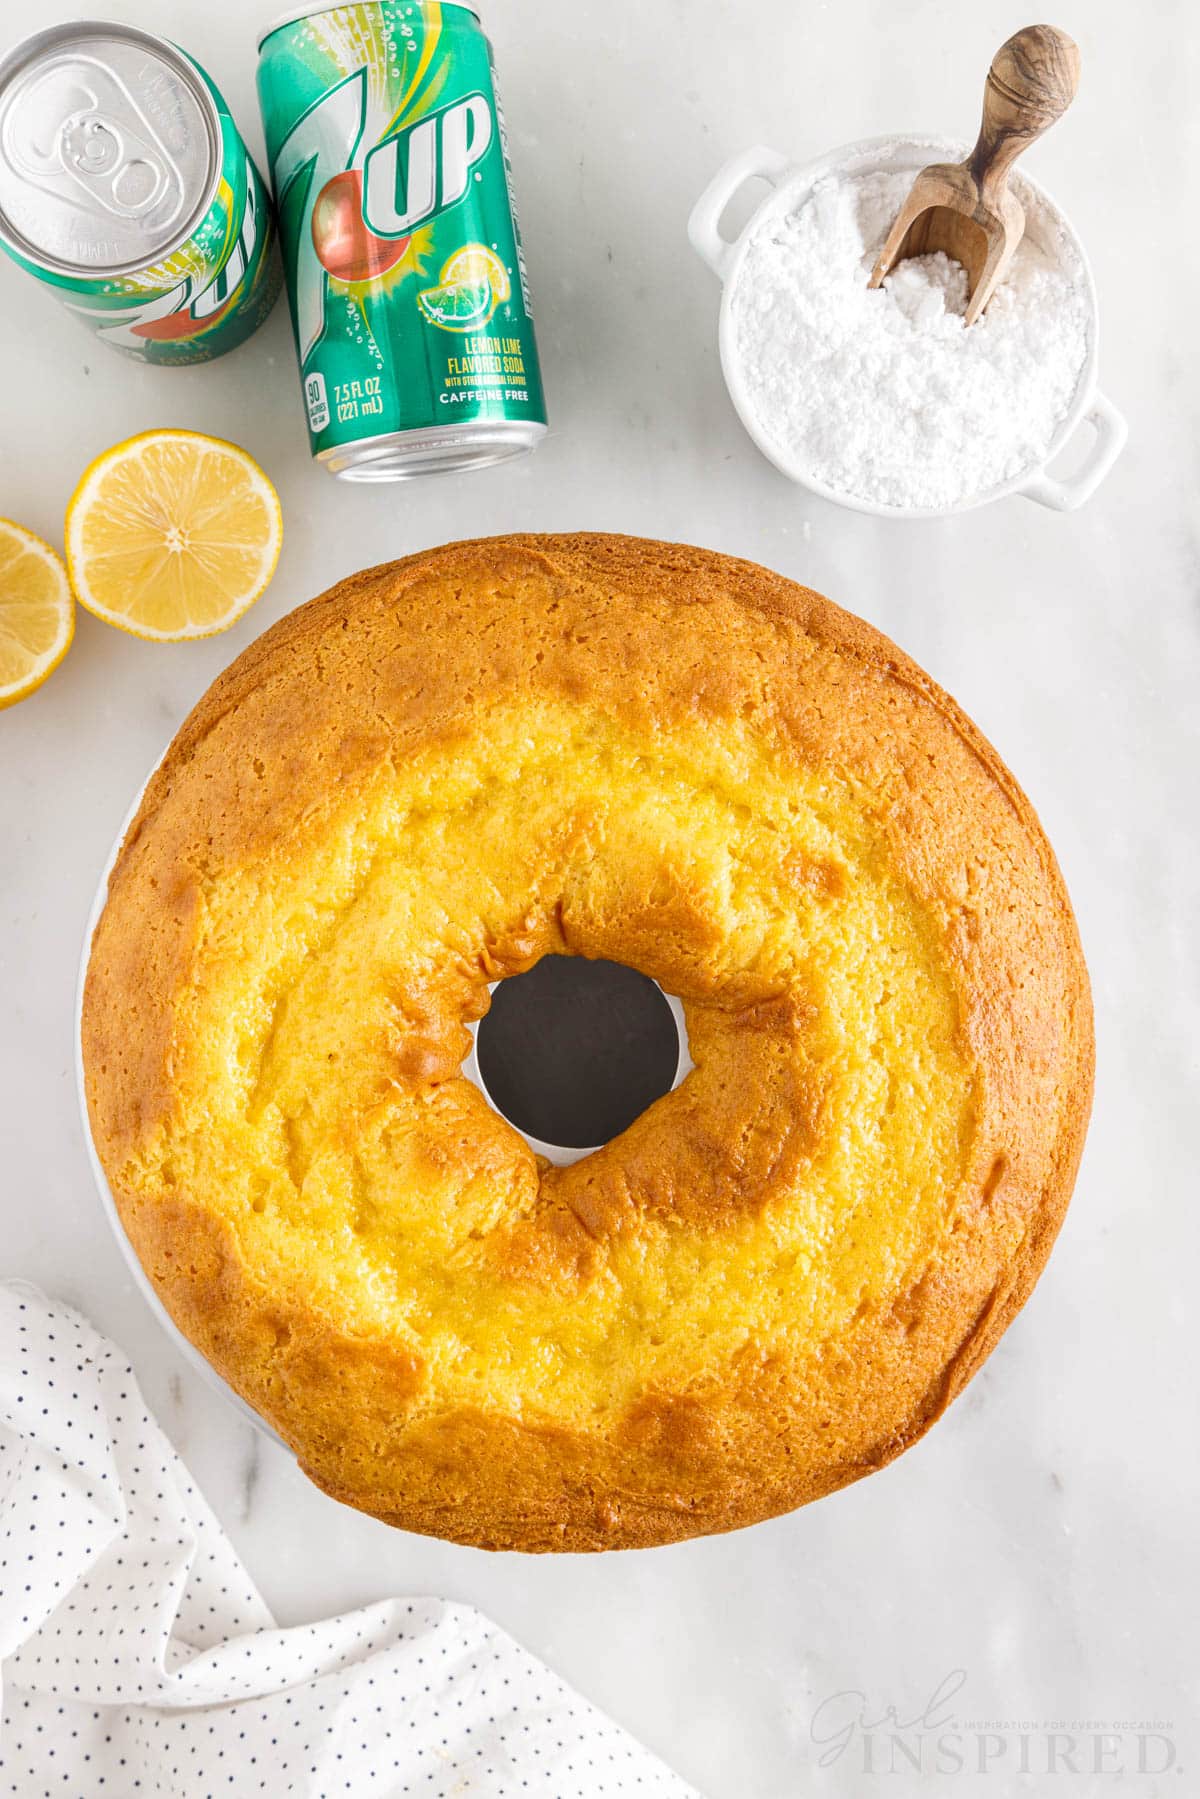 7 Up Cake with Cake Mix in a bundt pan after being baked.